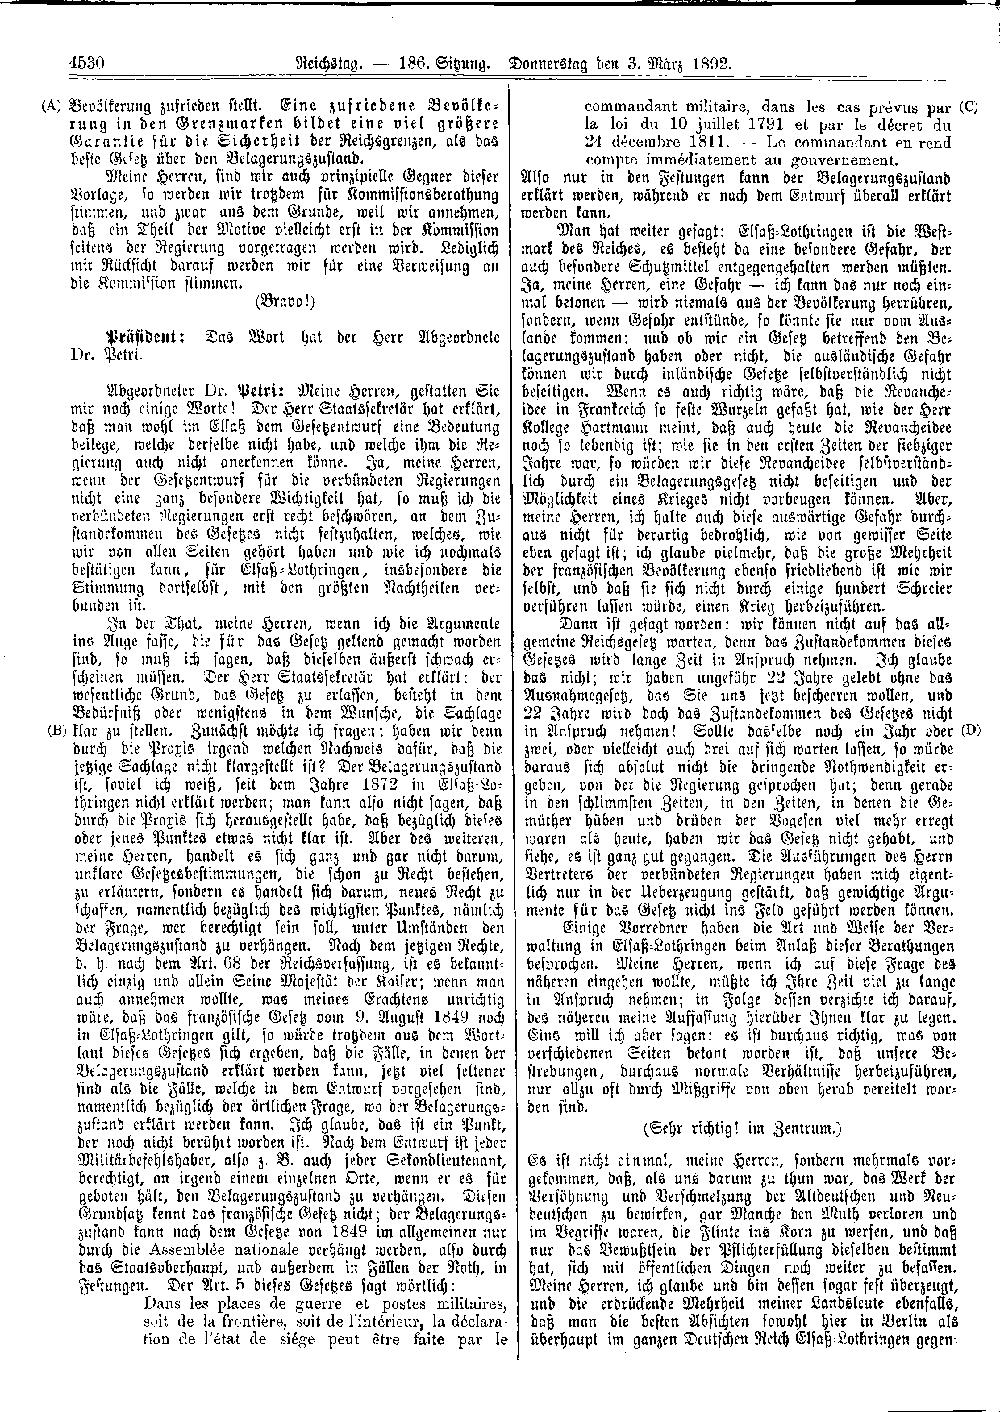 Scan of page 4530